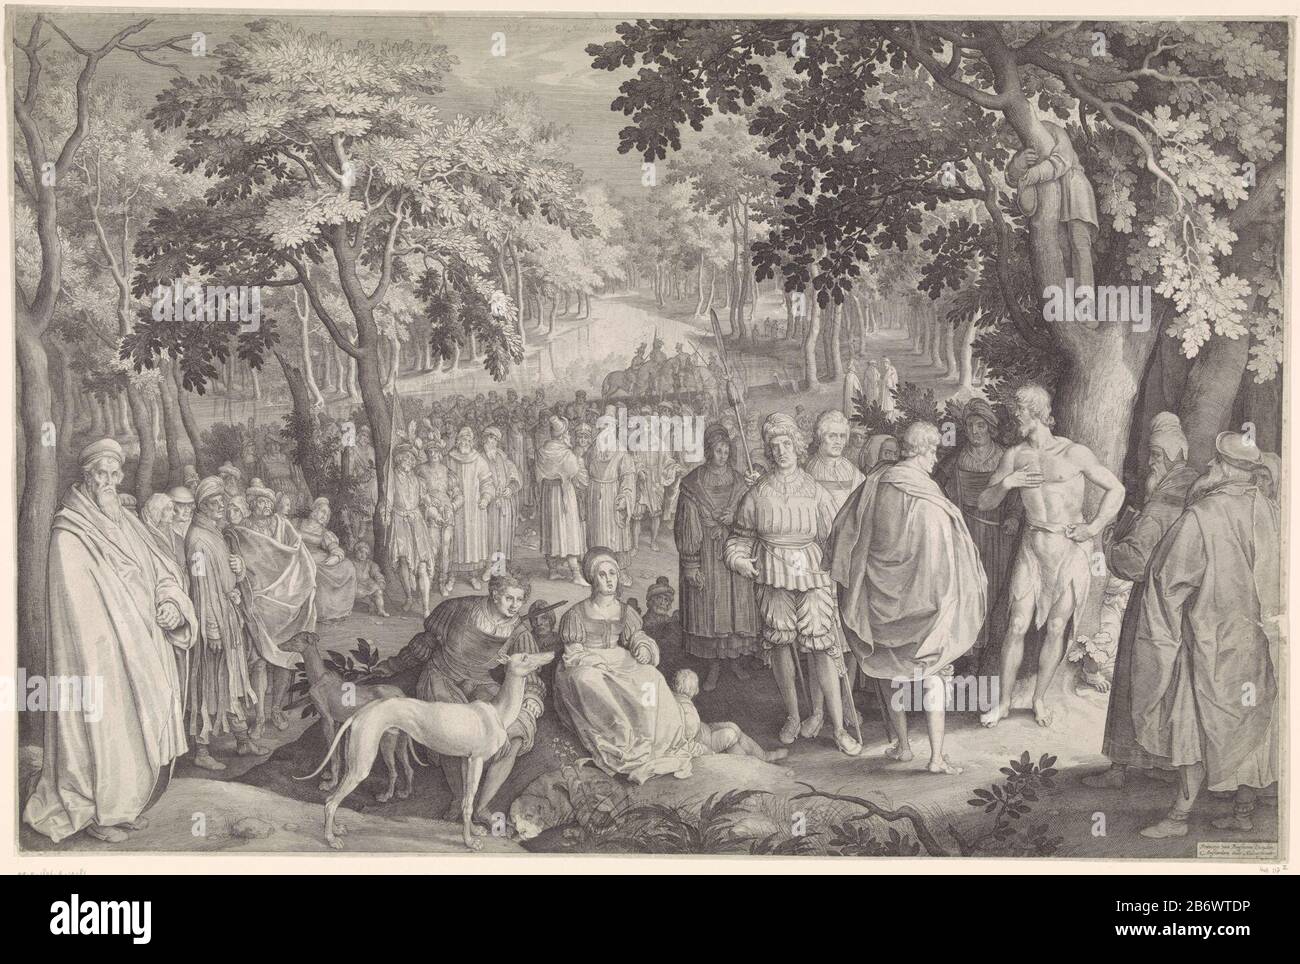 Johannes de Doper predikt tot de menigte A woodland. Right in the foreground John the Baptist standing under a tree. He preaches to a large menigte. Manufacturer : printmaker: Nicolaes de Bruyn (listed property) to design: Nicolaes de Bruyn (listed building) publisher: Francoys van Beusekom (listed property) Place manufacture: printmaker: Rotterdam Publisher: Amsterdam Date: 1619 Physical features: car material: paper Technique: engra (printing process) Dimensions: sheet b 695 mm x h 465 mm Subject John the Baptist preaching (perhaps Christ among the bystanders) Stock Photo